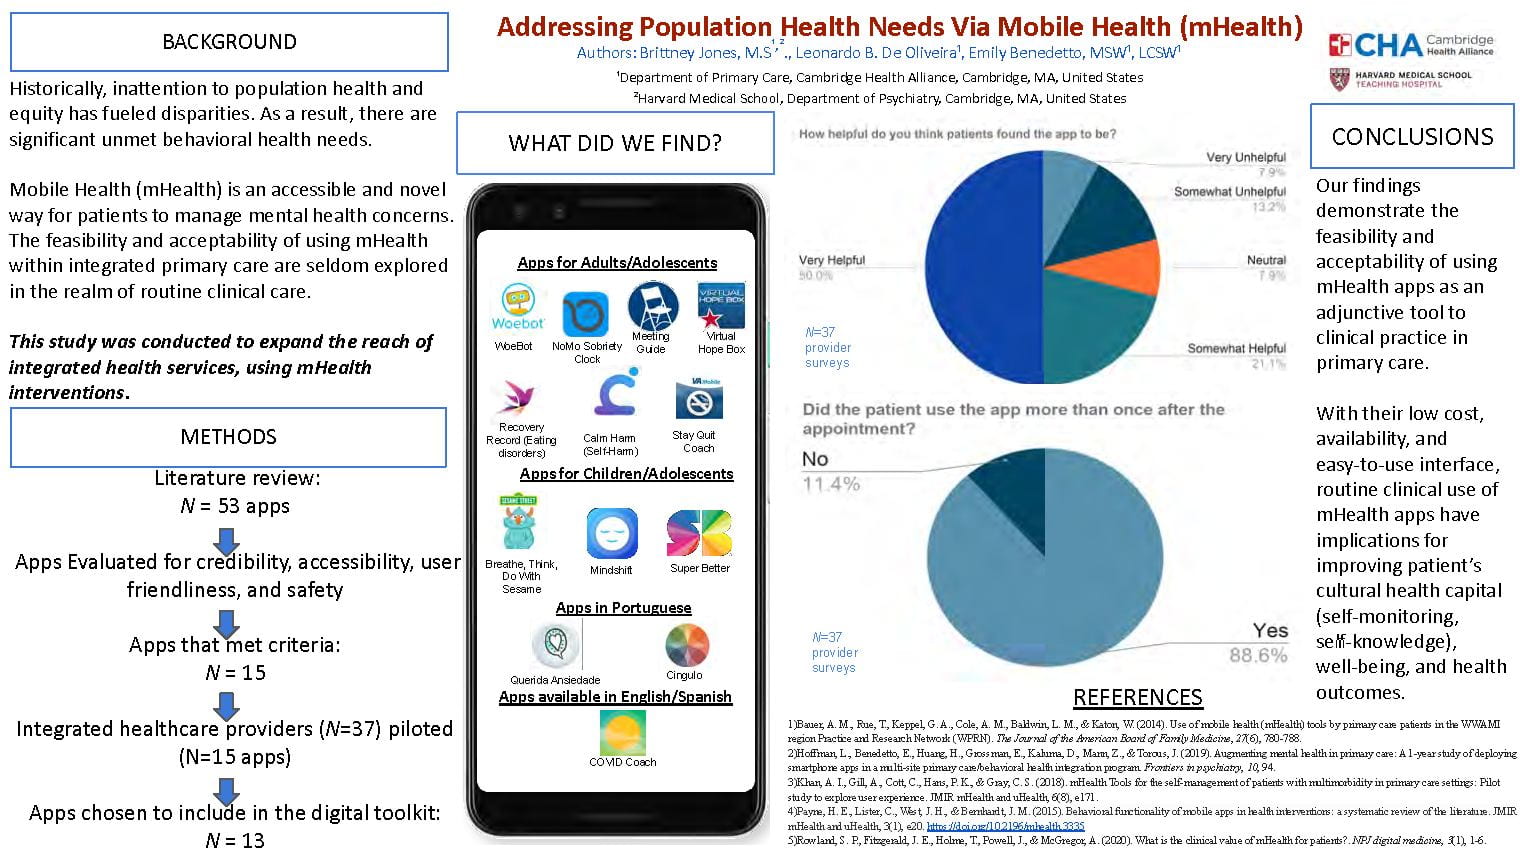 Addressing Population Health Needs Via Mobile Health (mHealth): Renewing Our Smartphone App Toolkit in a Multi-site PCBHI Program